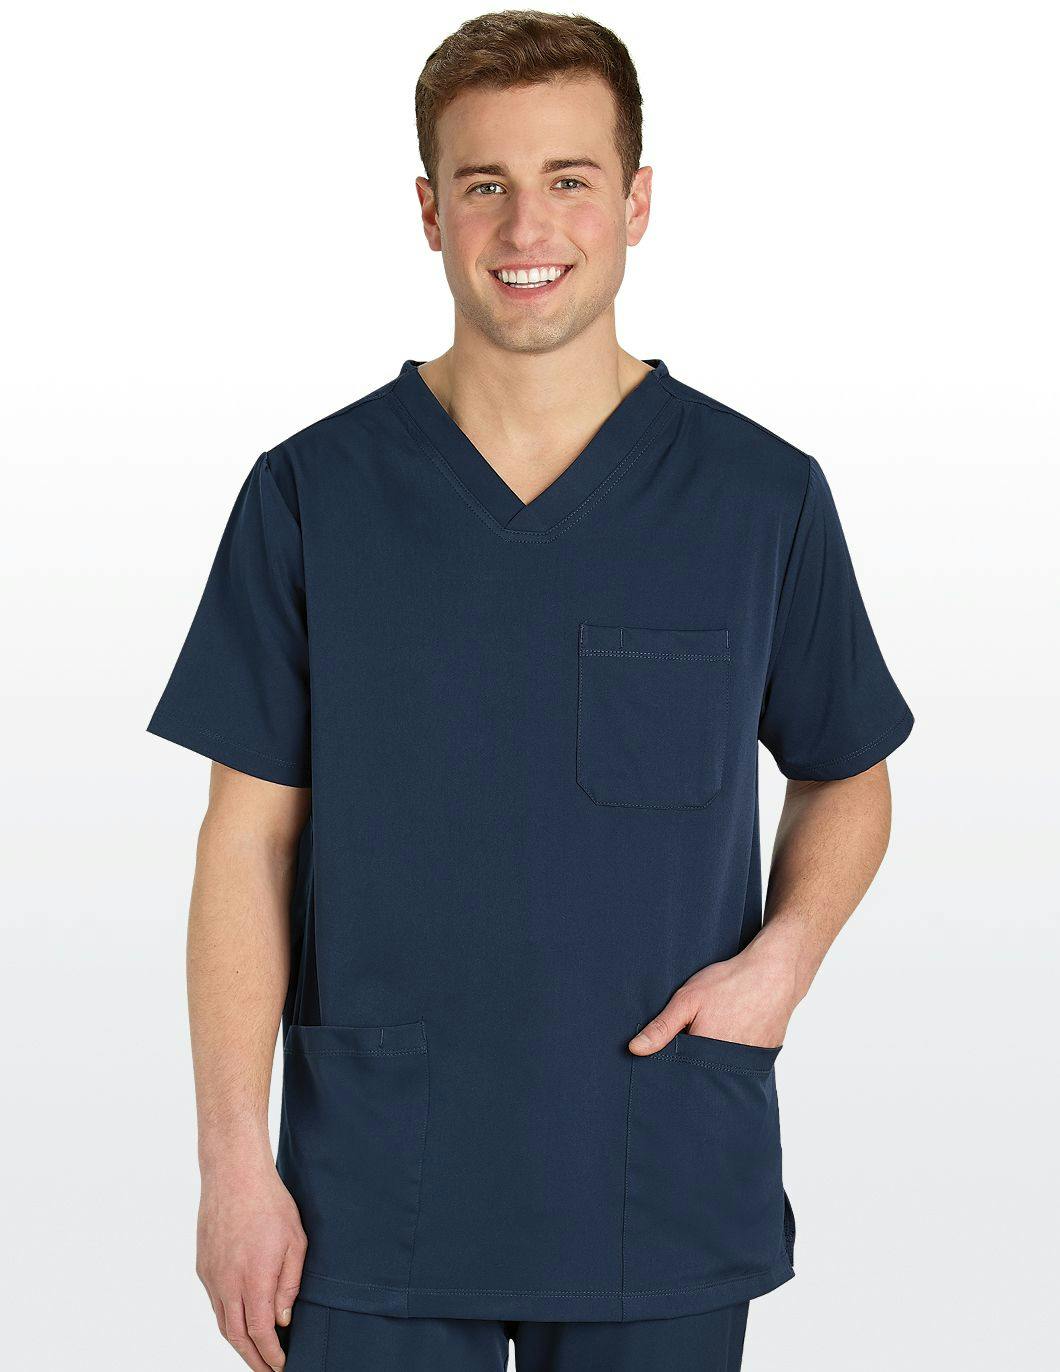 healing-hands-hh-works-maternity-scrub-top-navy